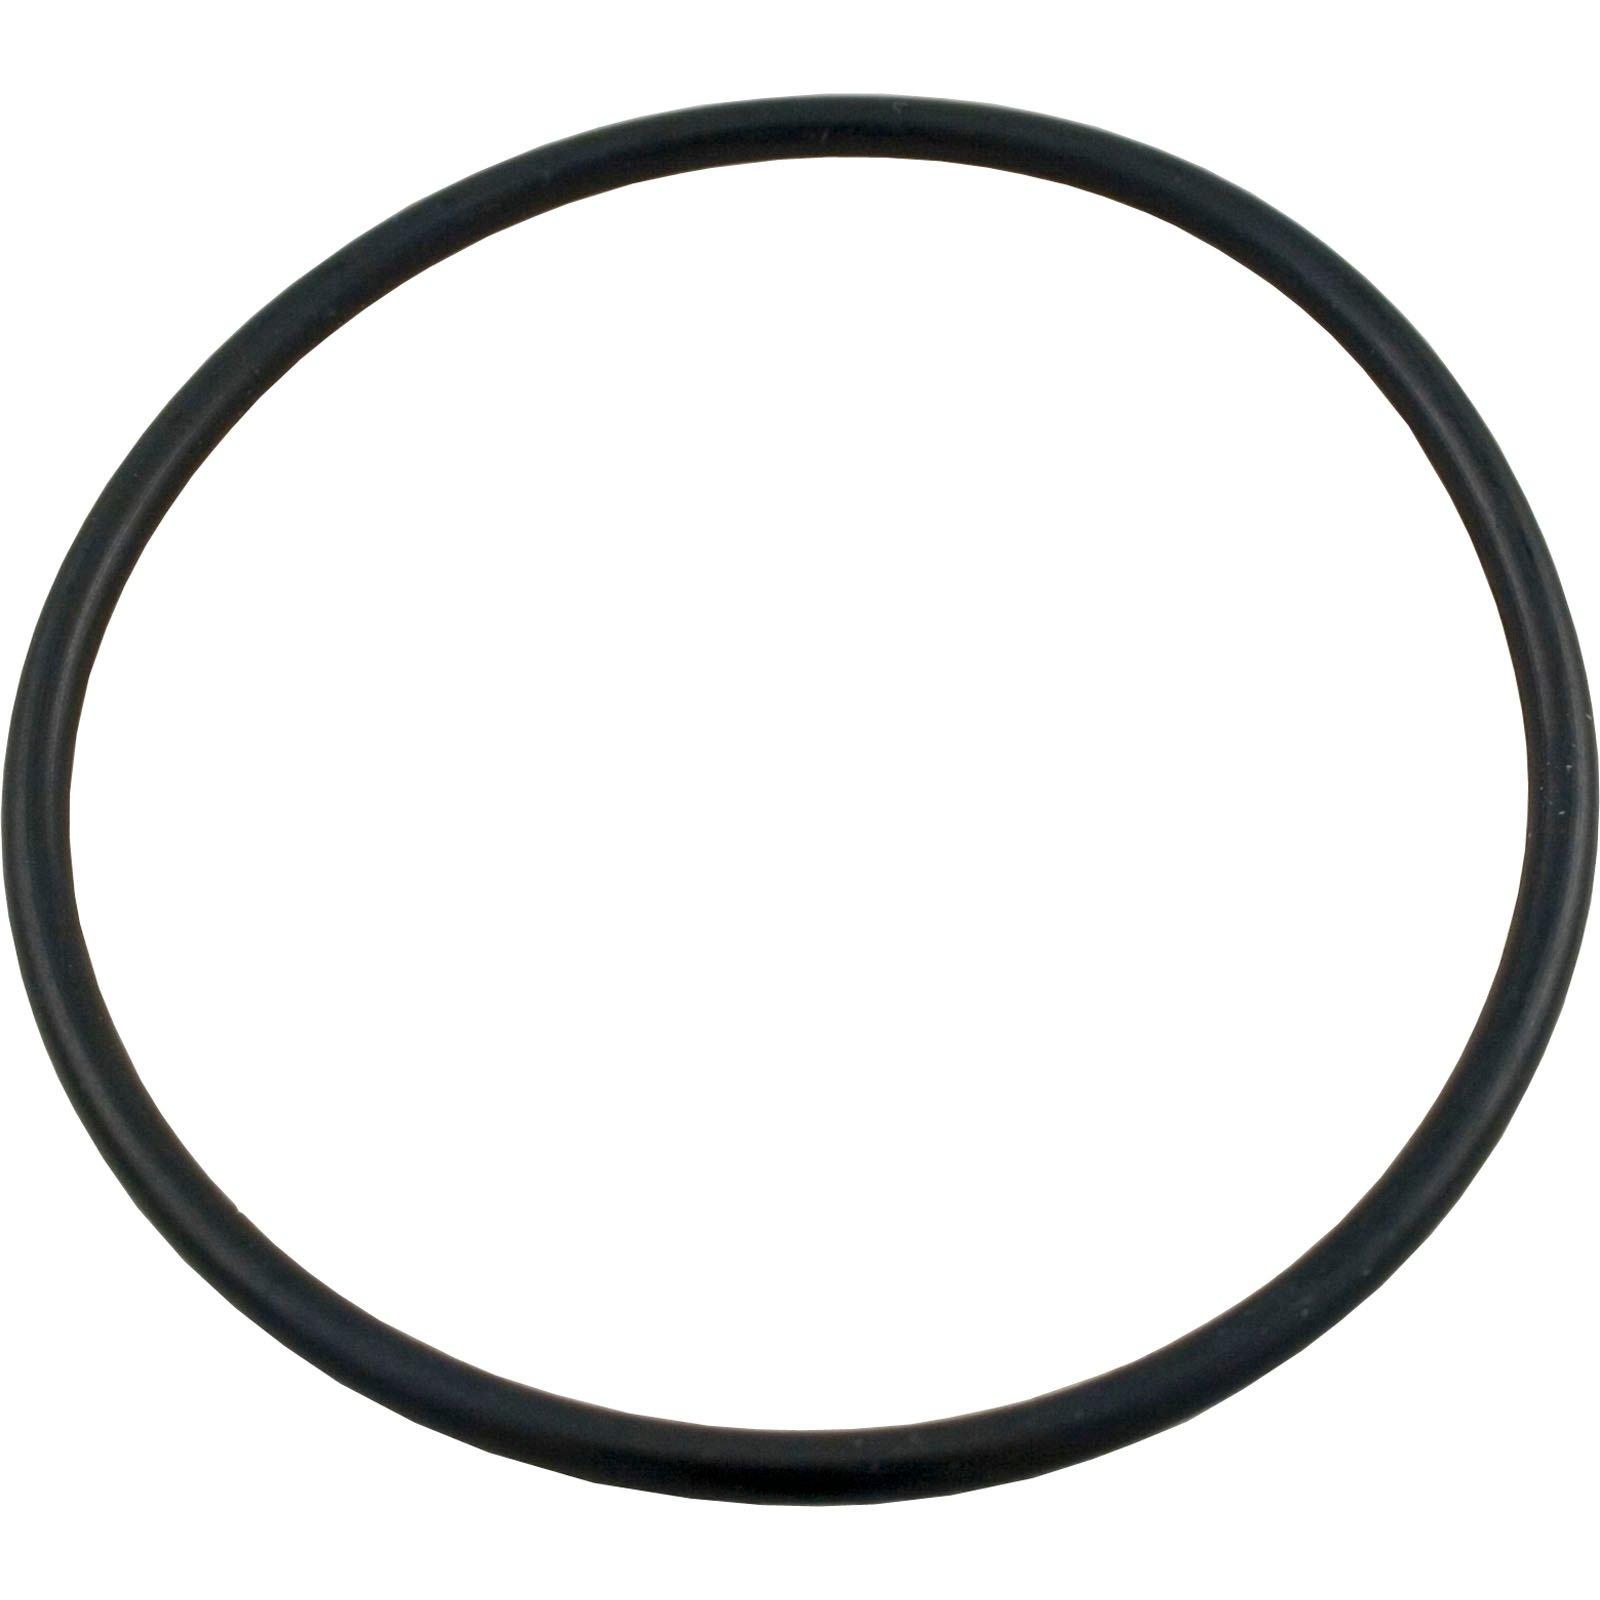 Hydro Seal Parco O-ring - 2.112in. Id